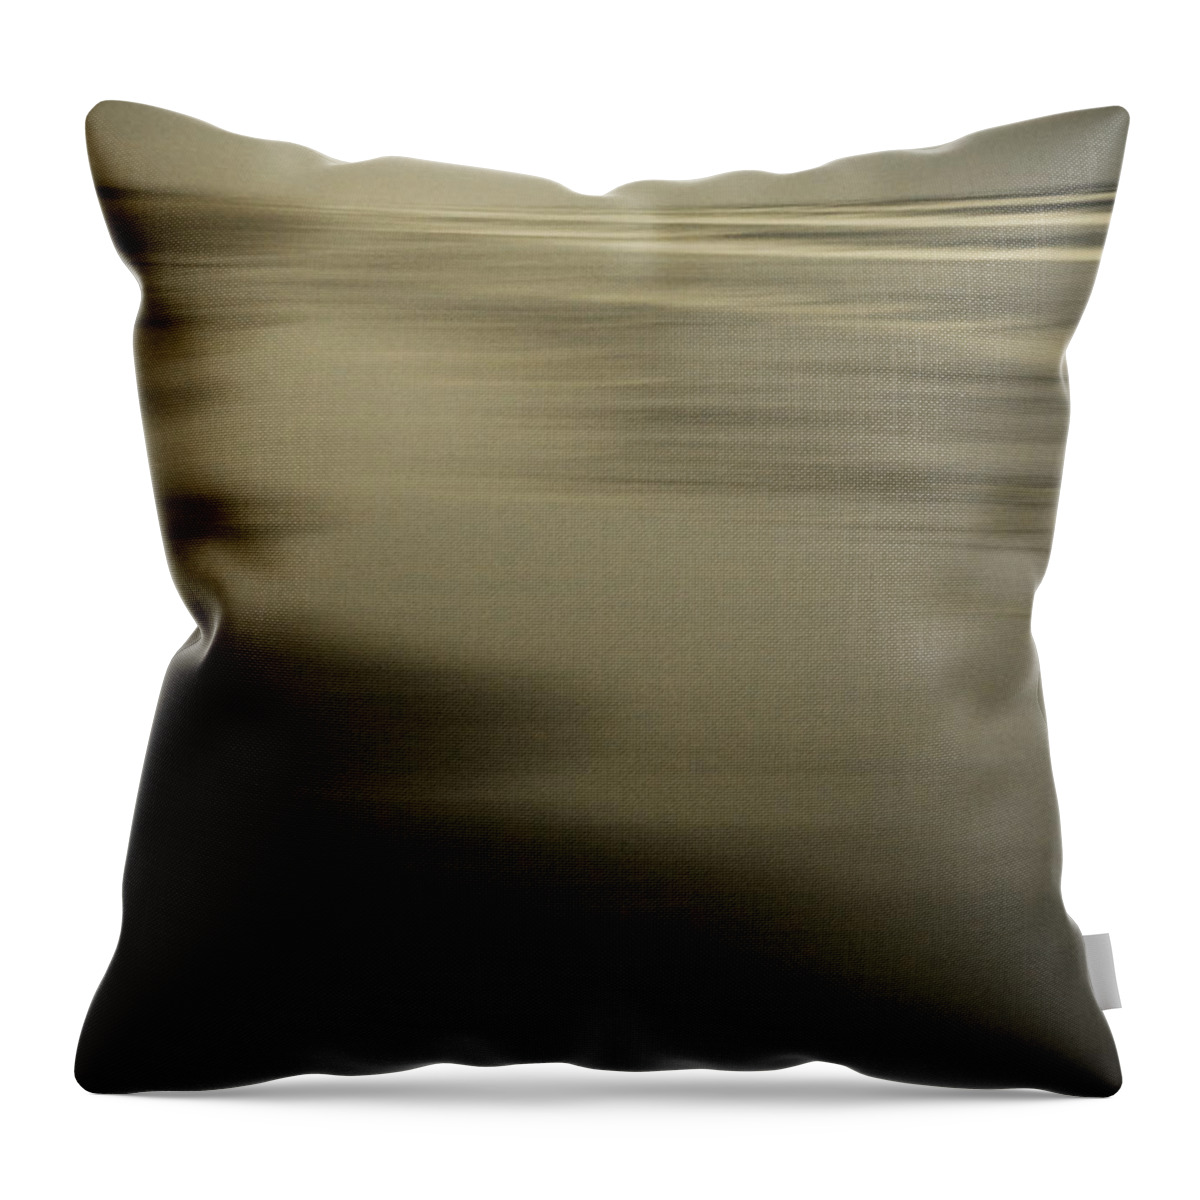 Corpus Christi Throw Pillow featuring the photograph Evening Sand by Marilyn Hunt